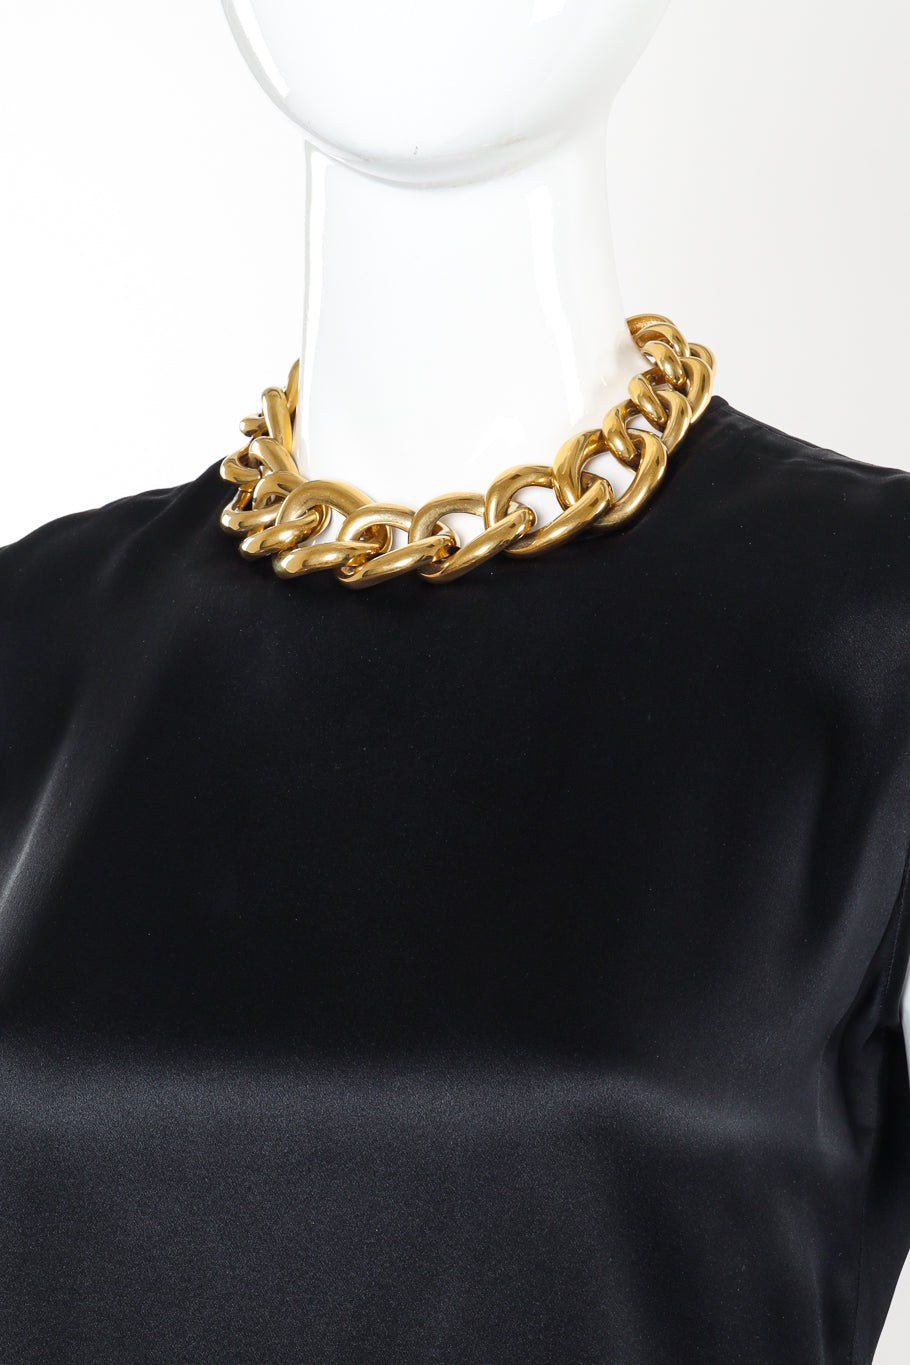 Vintage Givenchy Chunky Curb Link Necklace on mannequin  @recessla